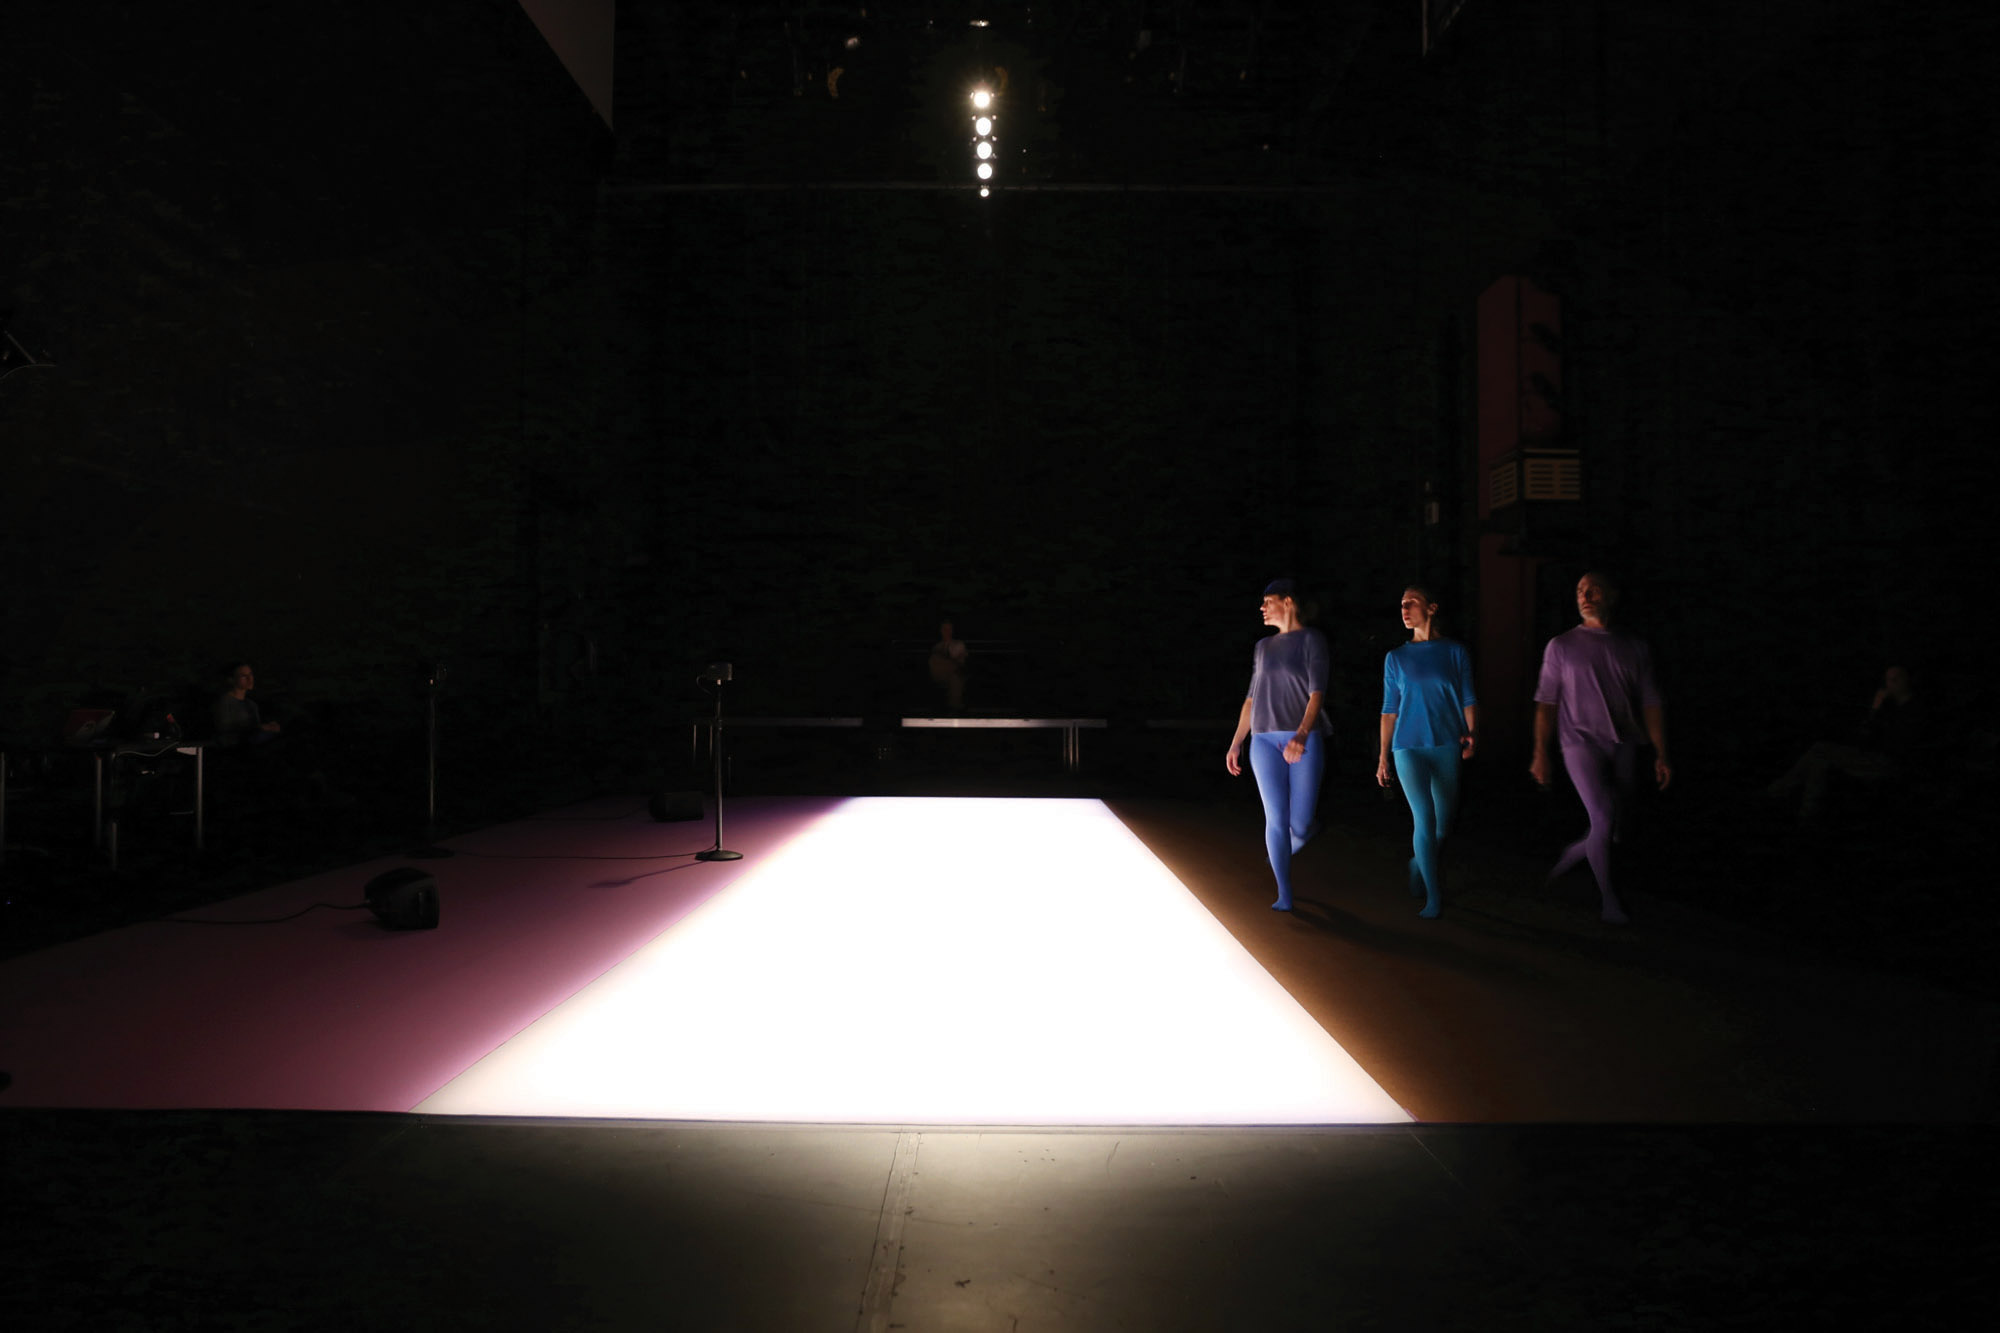 Three dancers wearing periwinkle, blue, purple walking around a rectangle of light on the floor